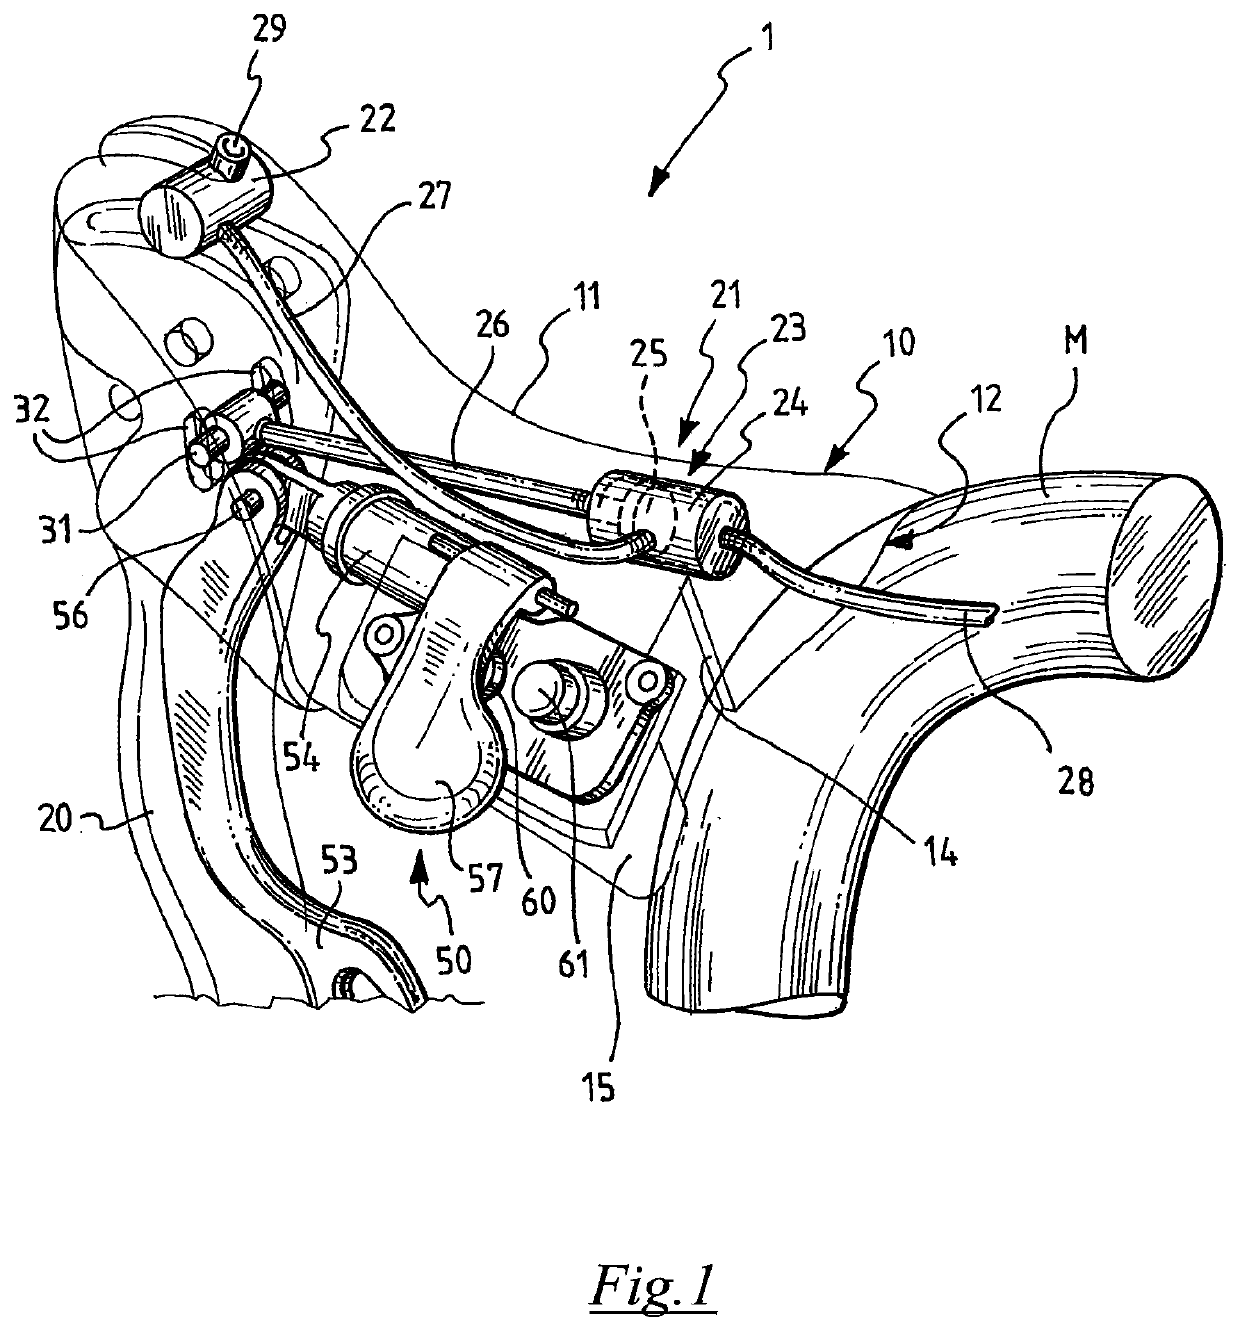 Integrated drive for bicycle handlebars